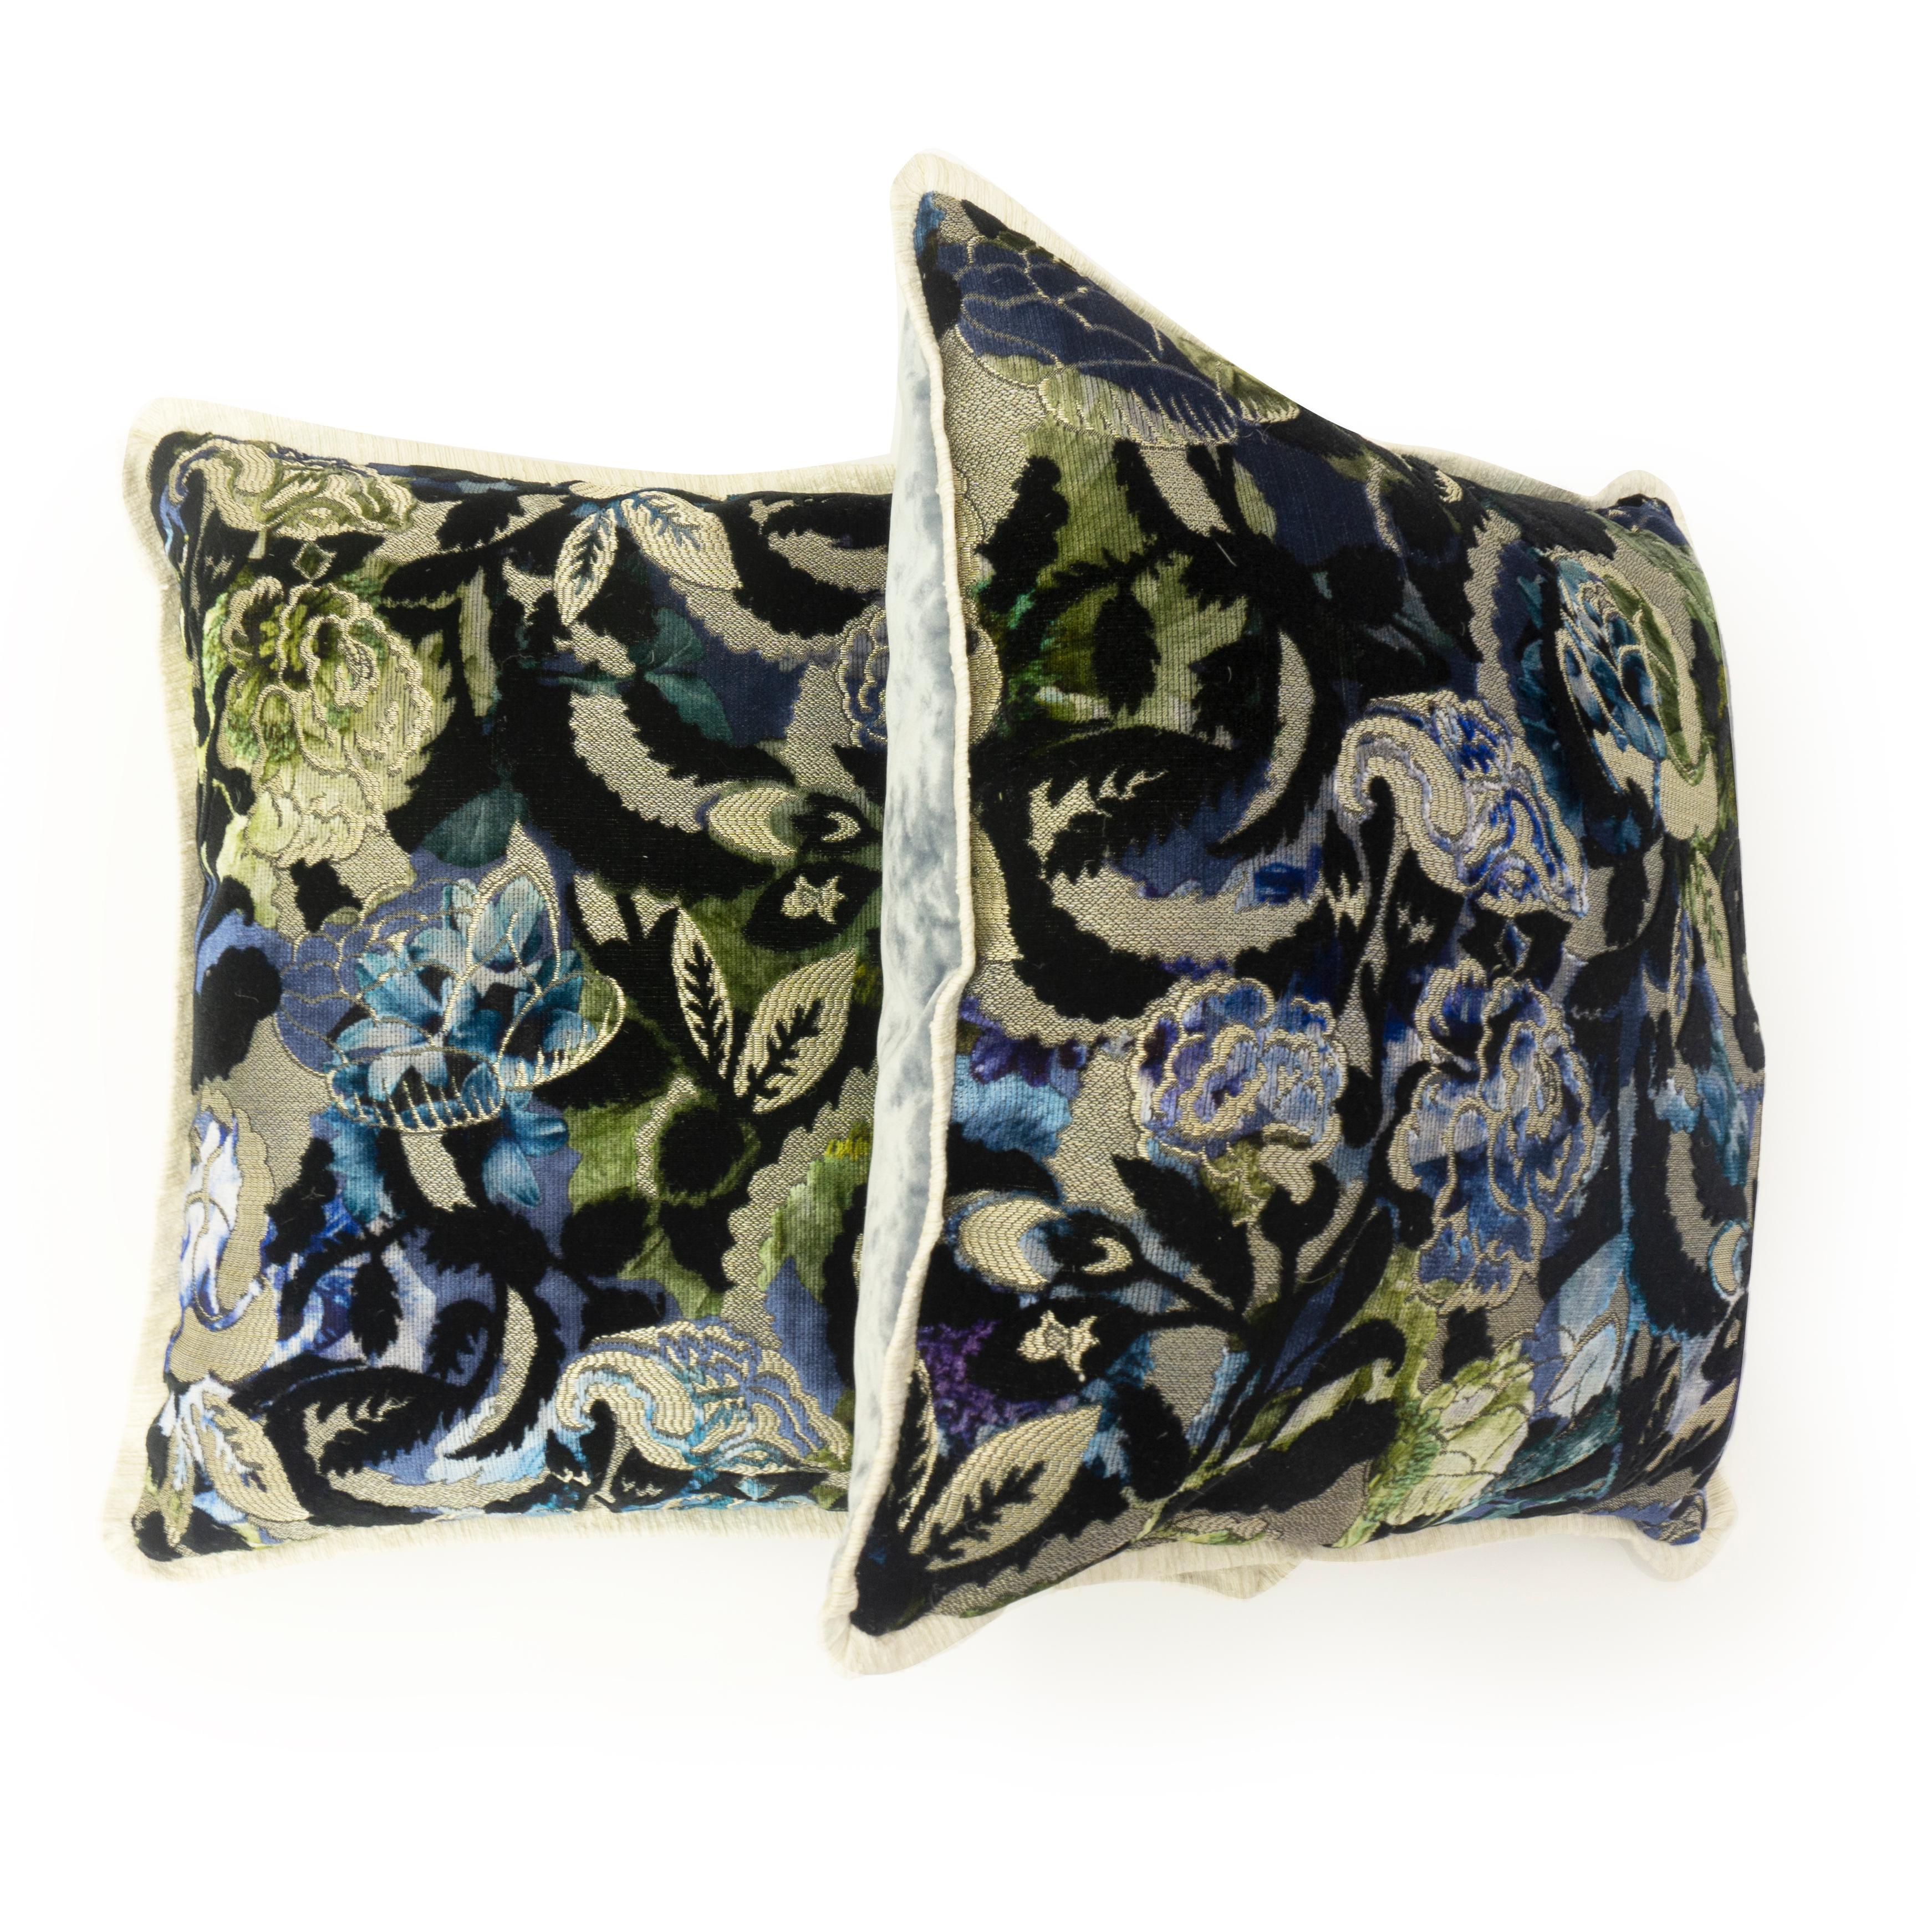 Hand sewn at our studio in Norwalk, Connecticut, these pillows feature a colored cut velvet jacquard floral designer print on the front. The back is sewn in a complimenting light blue velvet and bordered in a cream colored and textured flange.